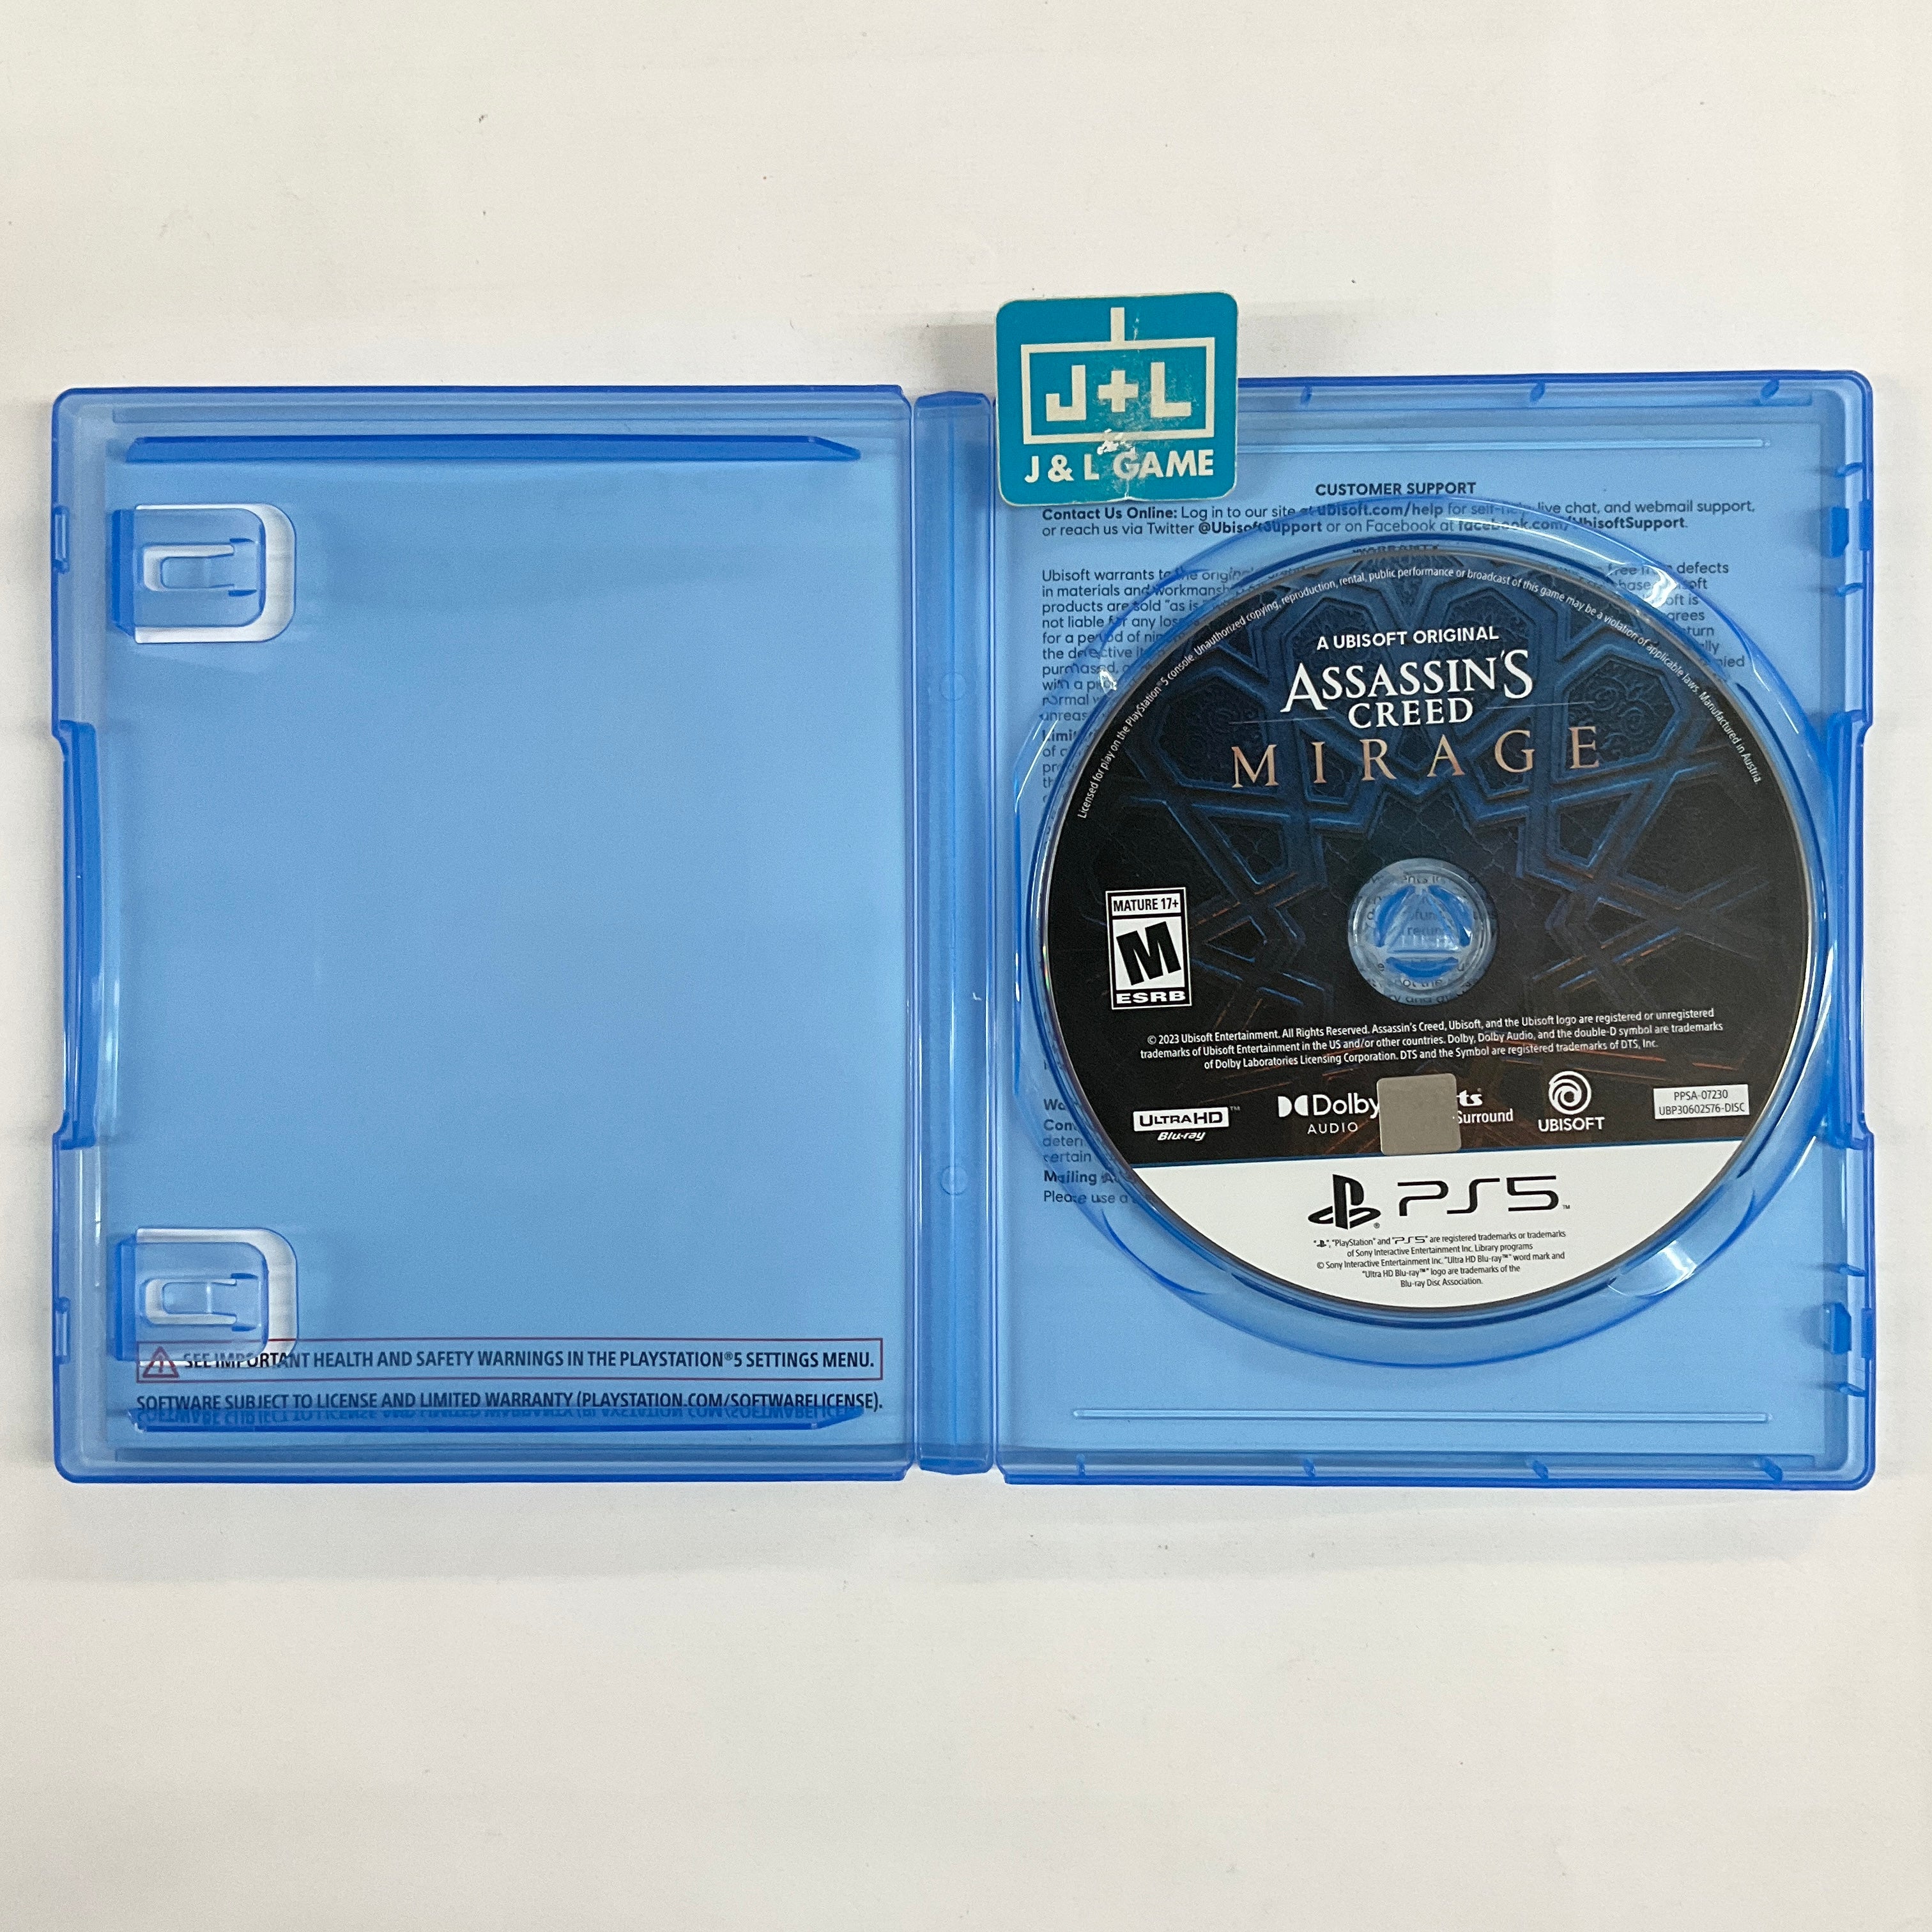 Assassin's Creed Mirage (Deluxe Edition) - (PS5) PlayStation 5 [Pre-Owned] Video Games Ubisoft   